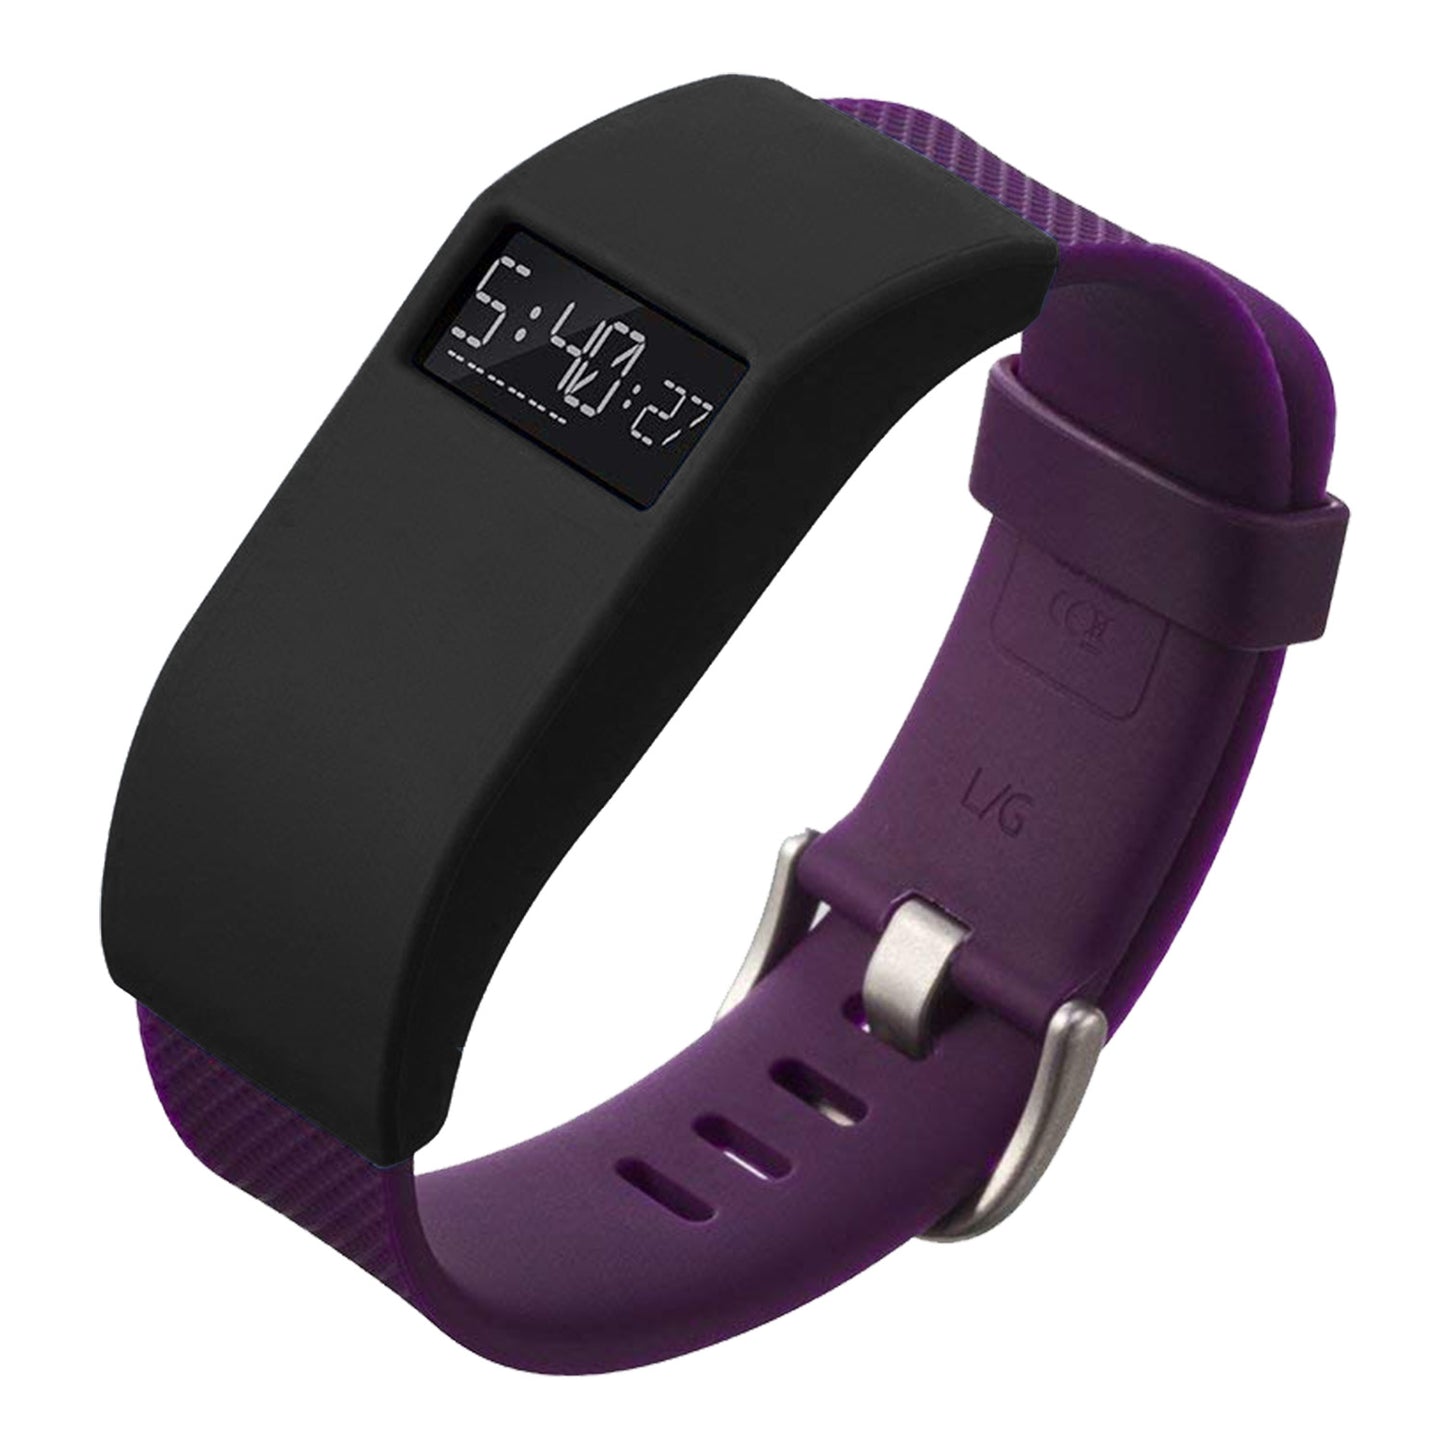 Rubber Protective Case for Fitbit Charge HR